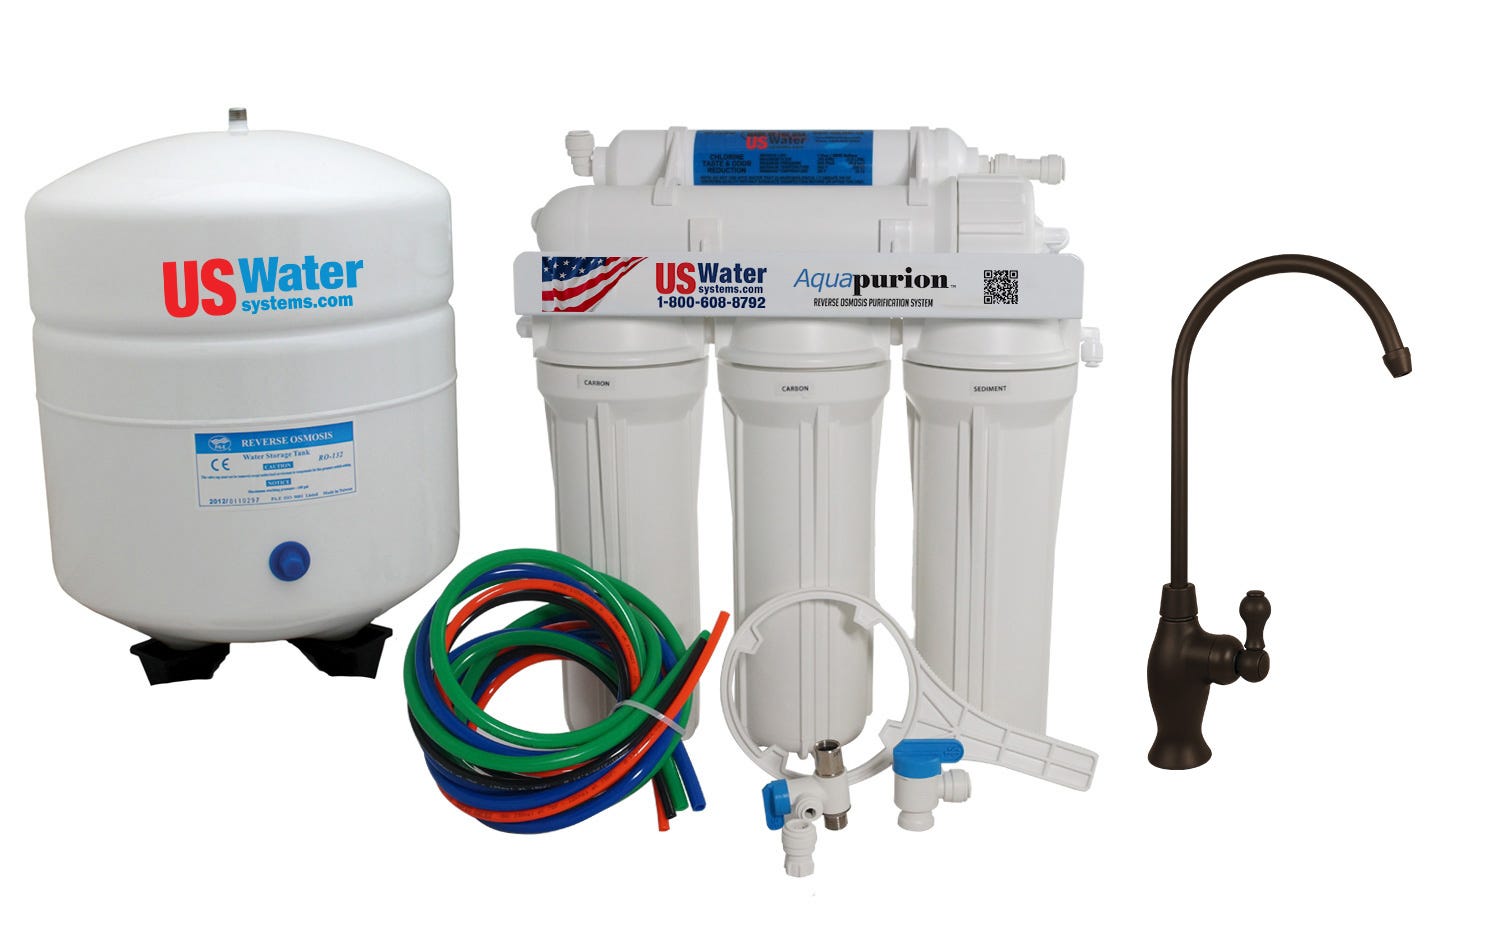 US Water Aquapurion 5-Stage Reverse Osmosis System With Enhanced Nitrate Removal